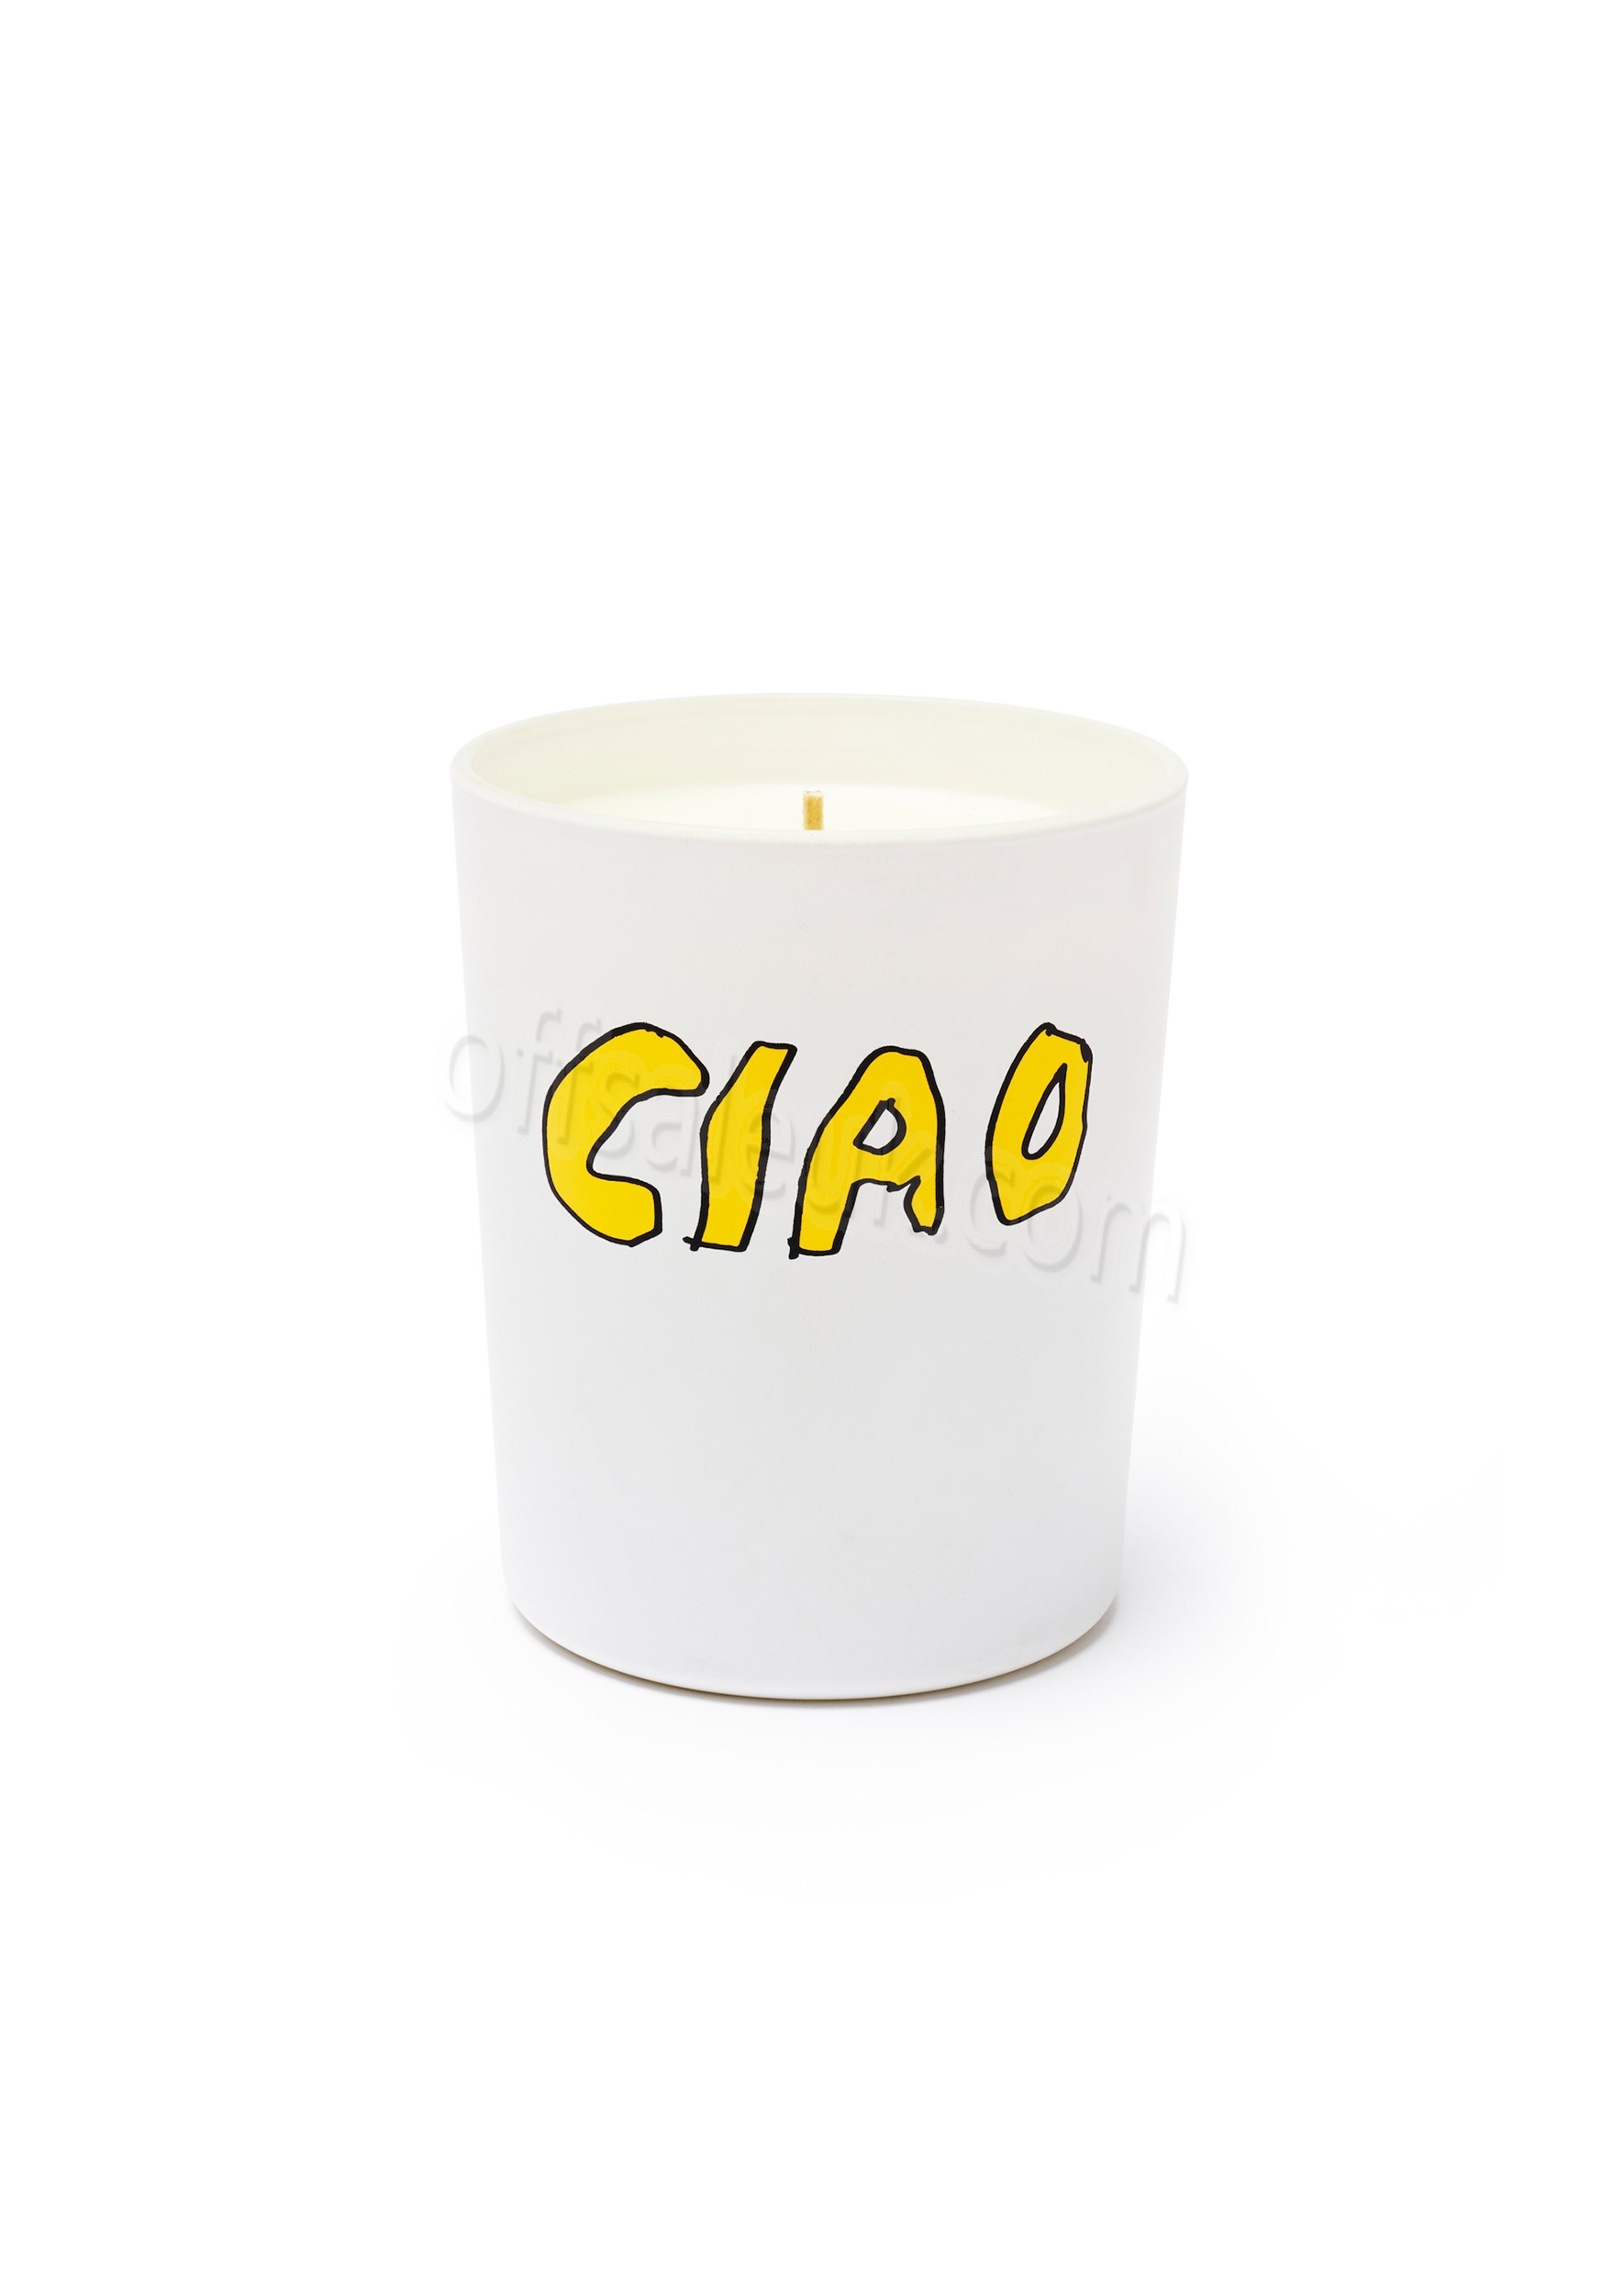 Cheap Ciao Candle - Cheap Ciao Candle